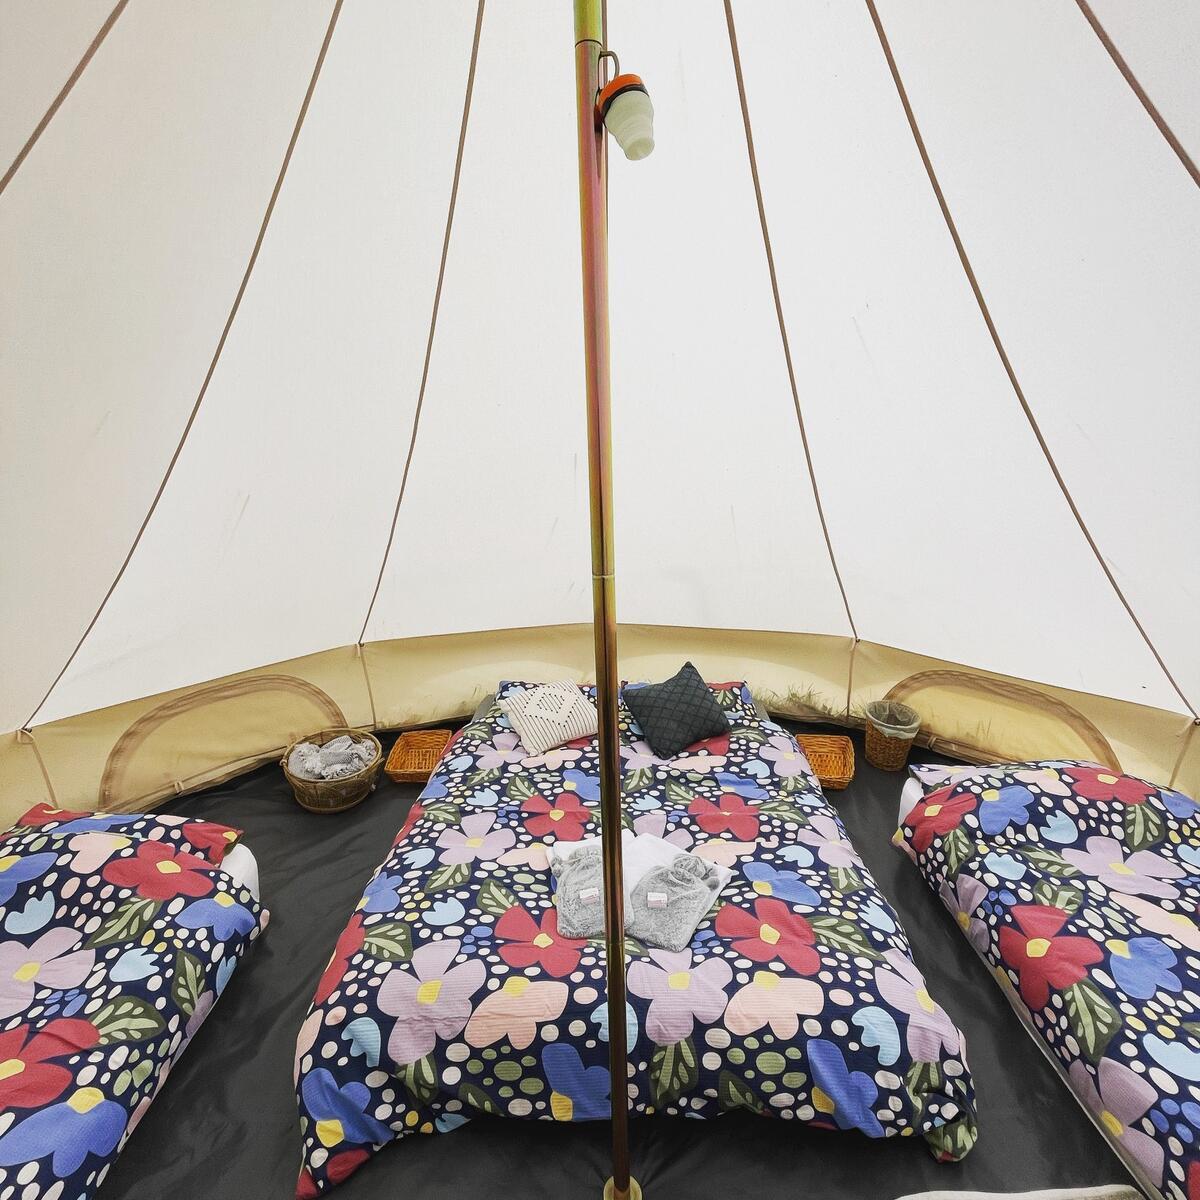 Inside bell tent with three beds